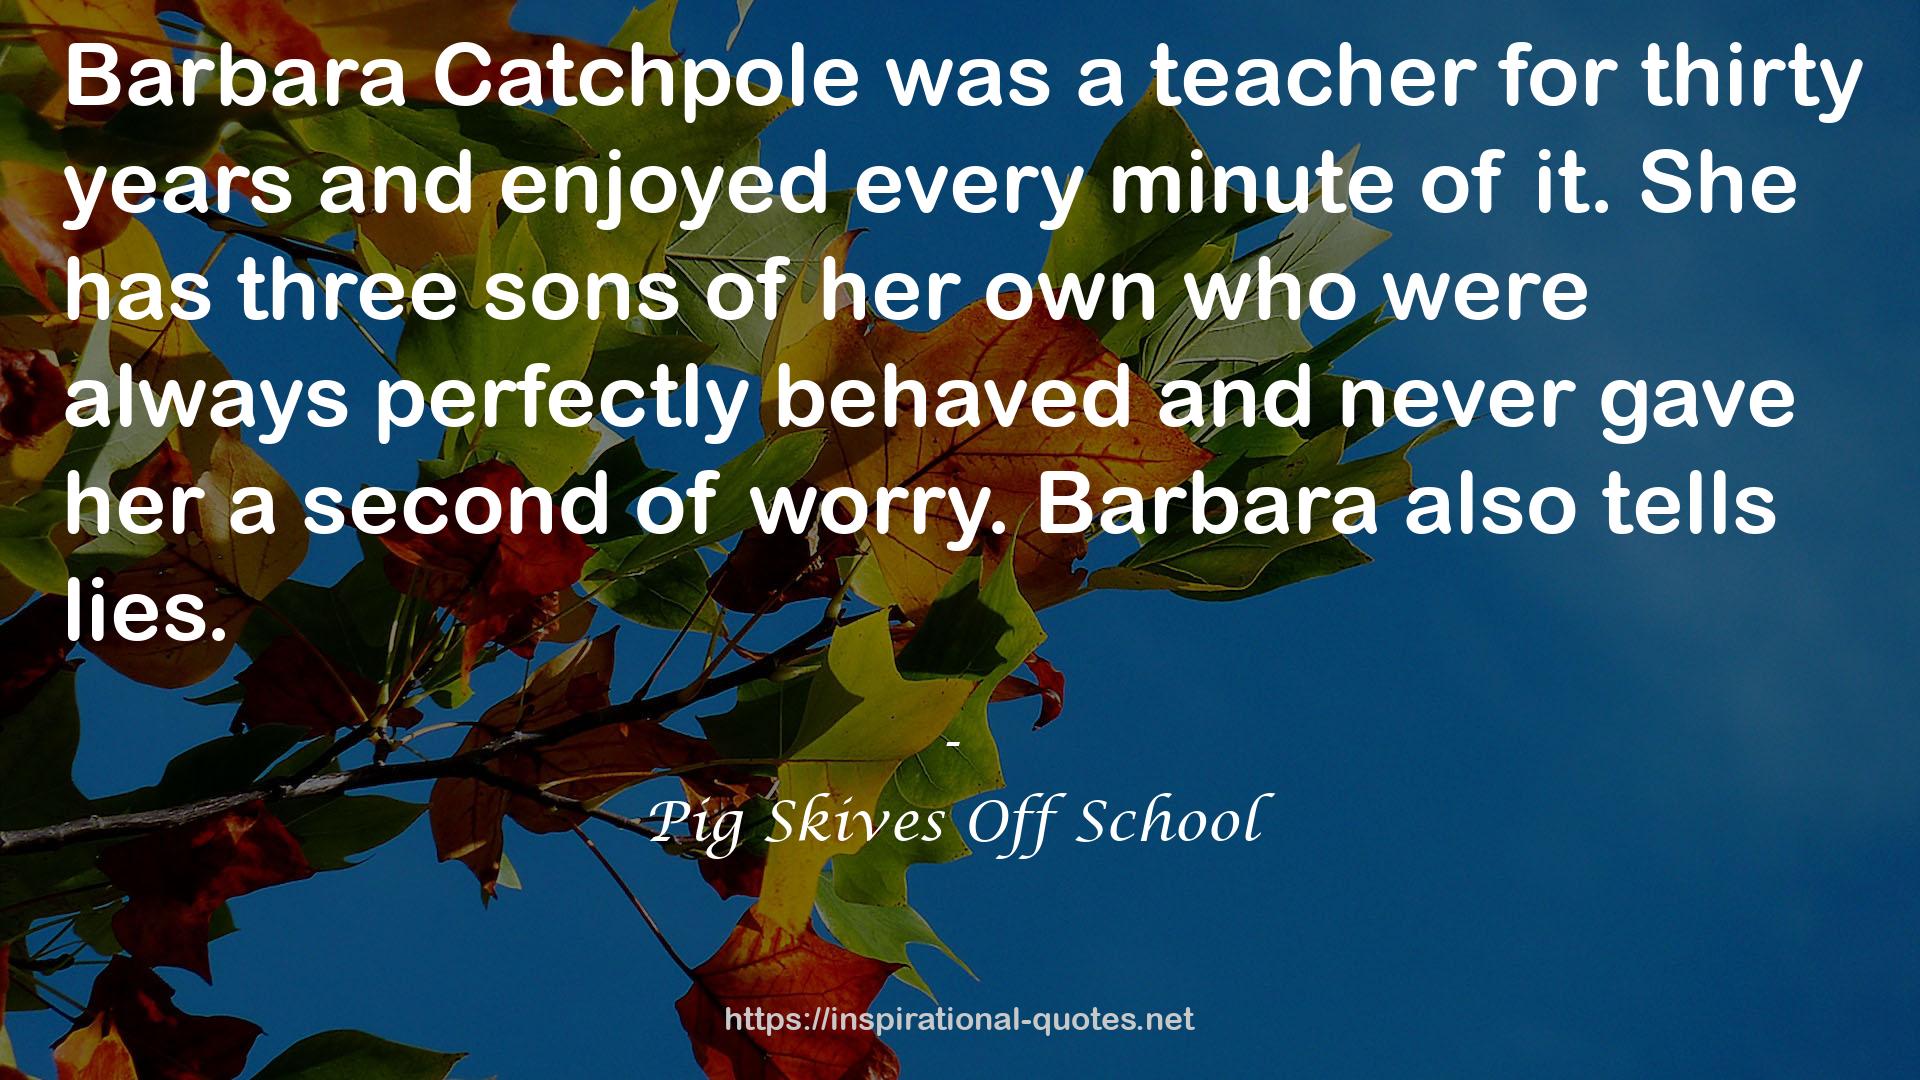 Pig Skives Off School QUOTES